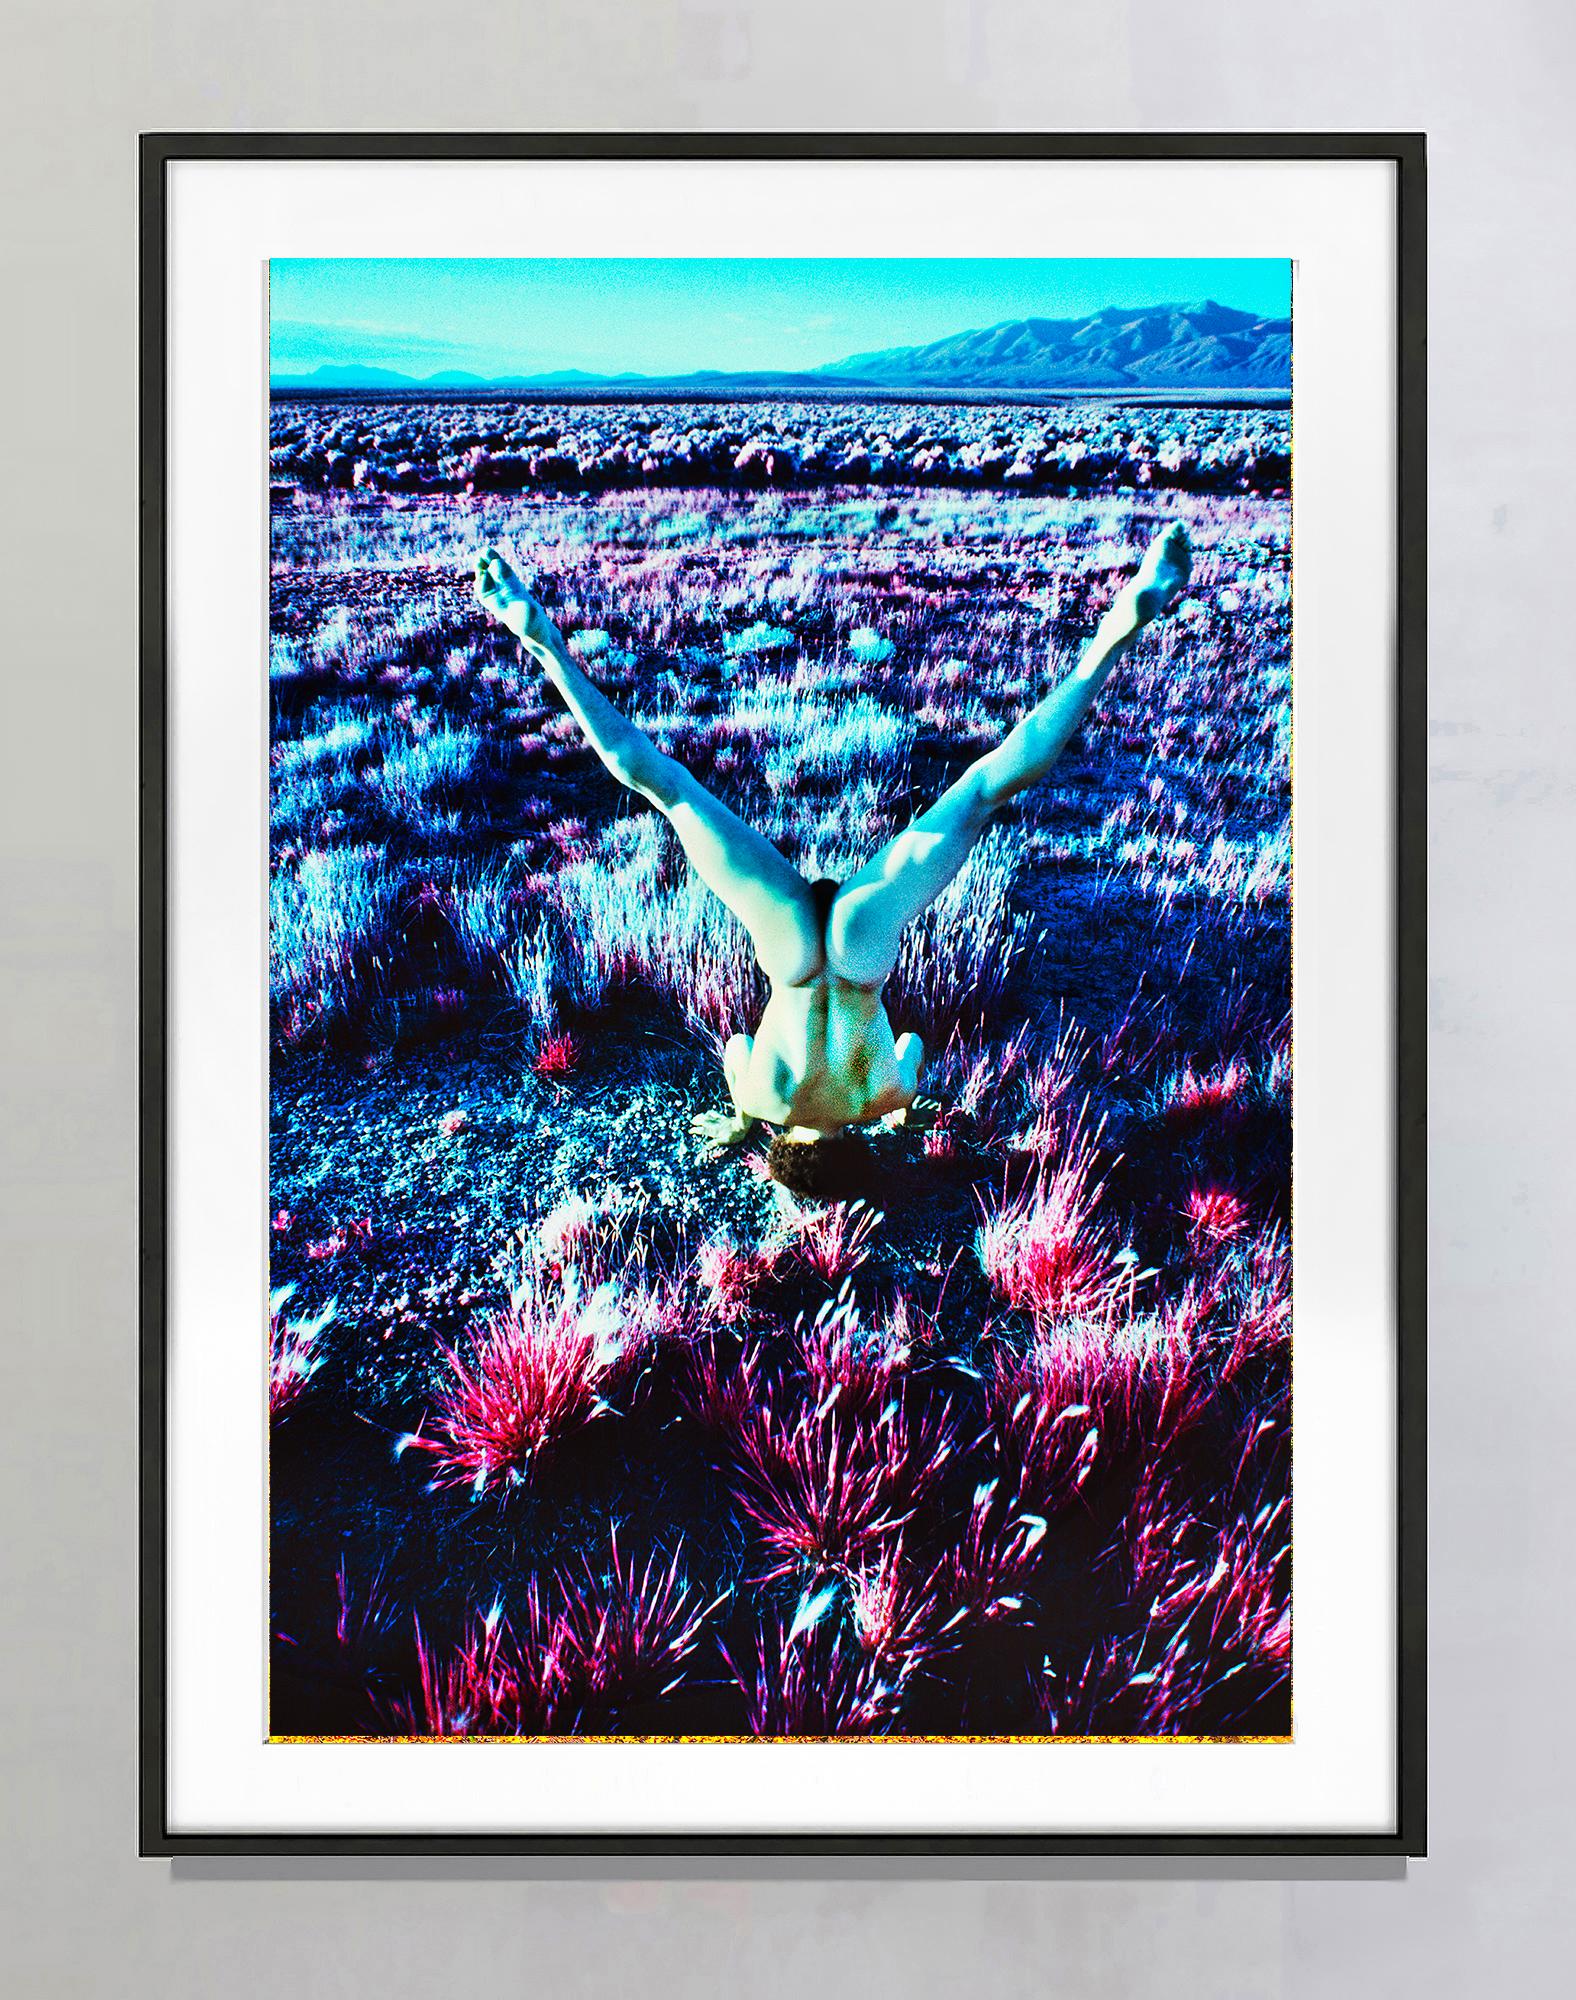  Nude Man Spouting in the Desert - Gay Interest-  Born from Mother Earth - Photograph by Mitchell Funk